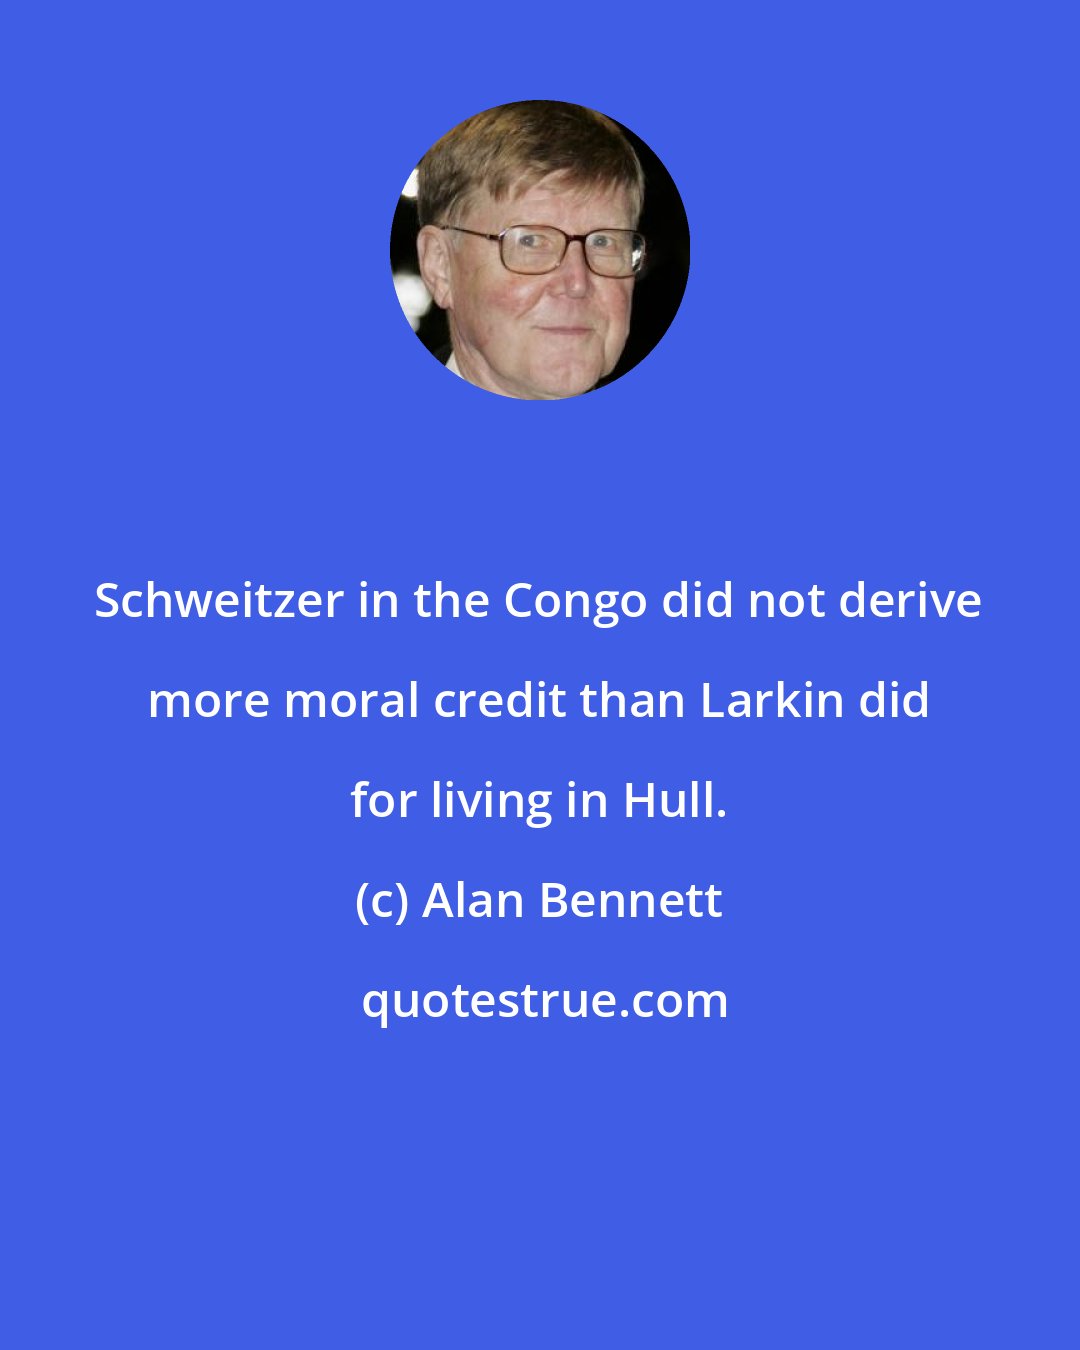 Alan Bennett: Schweitzer in the Congo did not derive more moral credit than Larkin did for living in Hull.